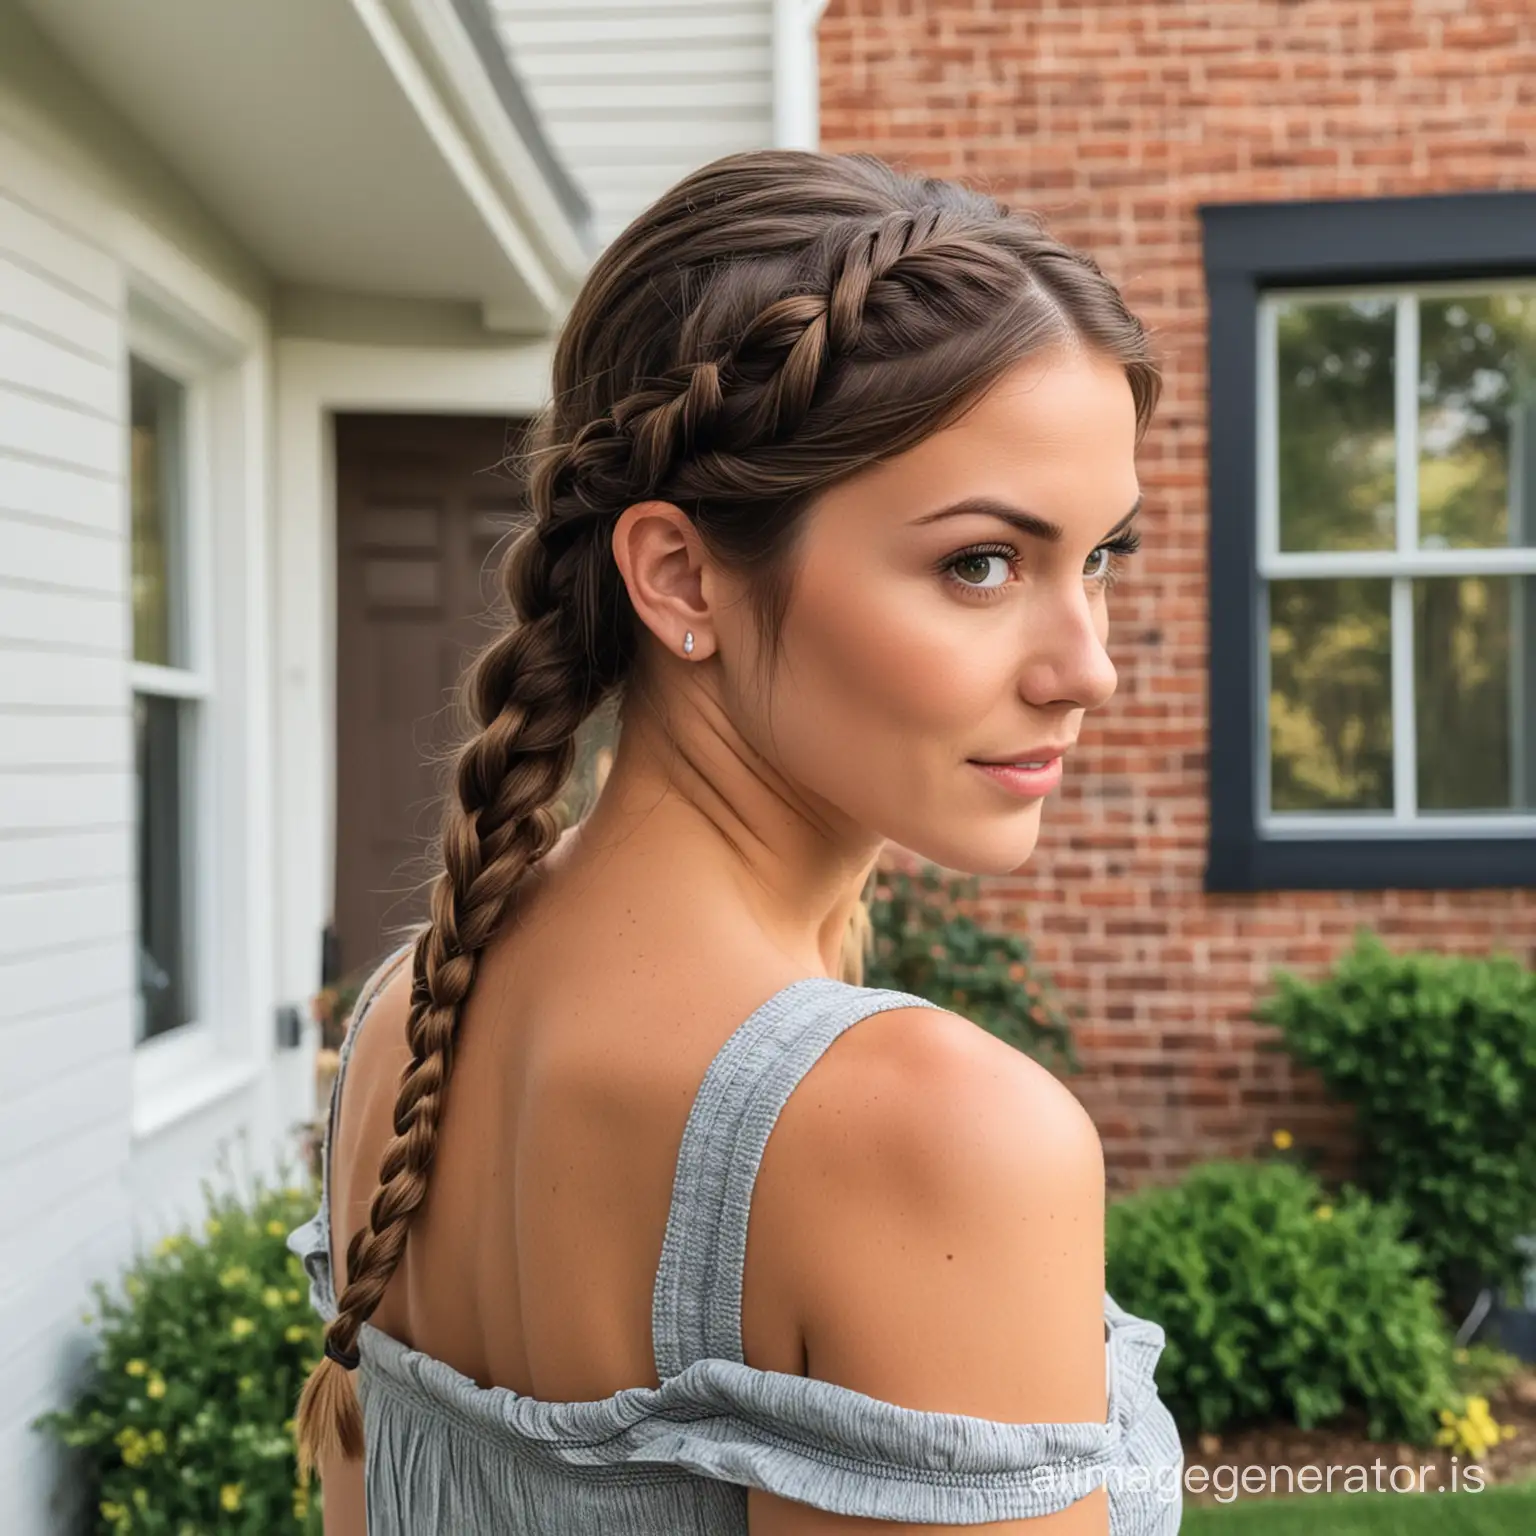 Beautiful-Brunette-Woman-with-Elegant-Braid-Posing-in-Vintage-Outfit-by-a-Quaint-Cottage